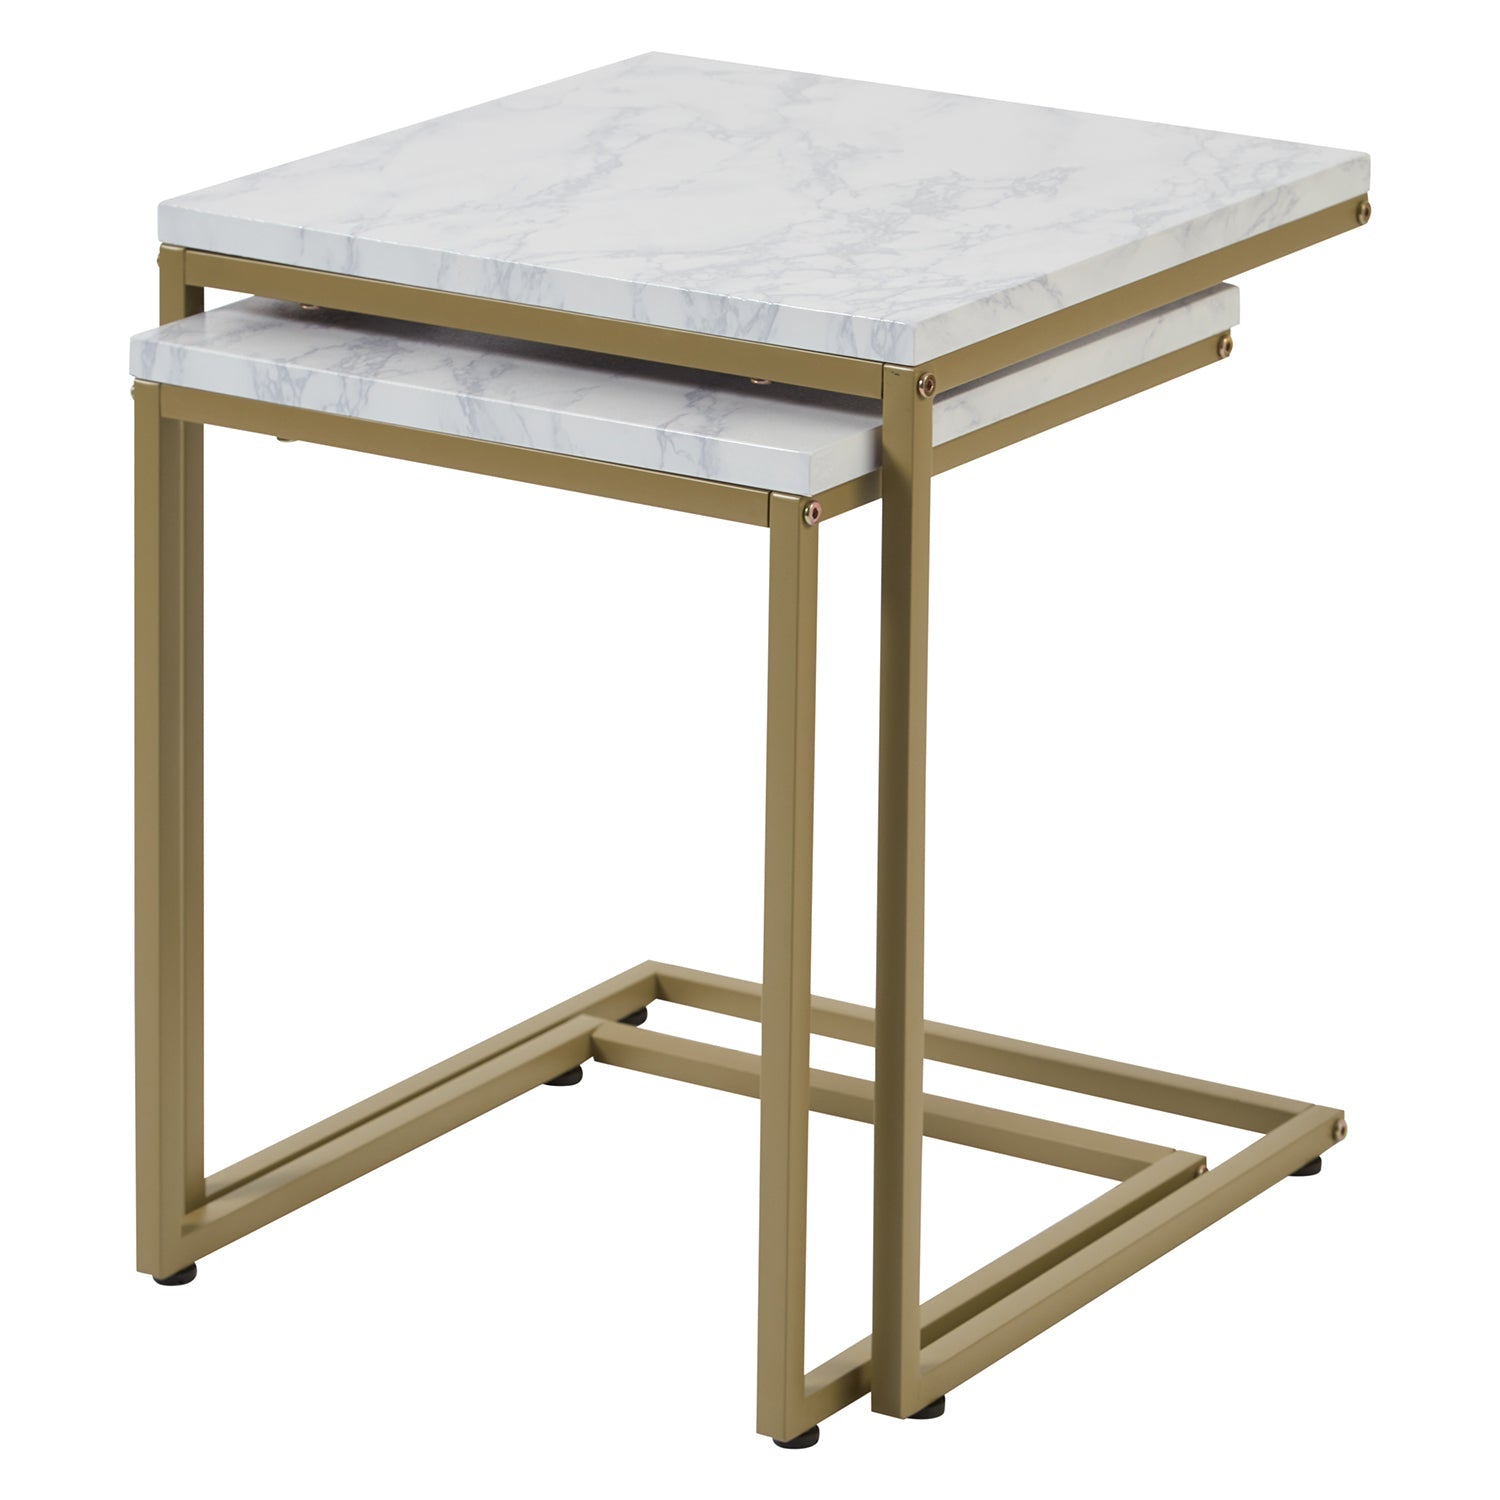 Jay nest of tables - Marble effect and gold - Laura James